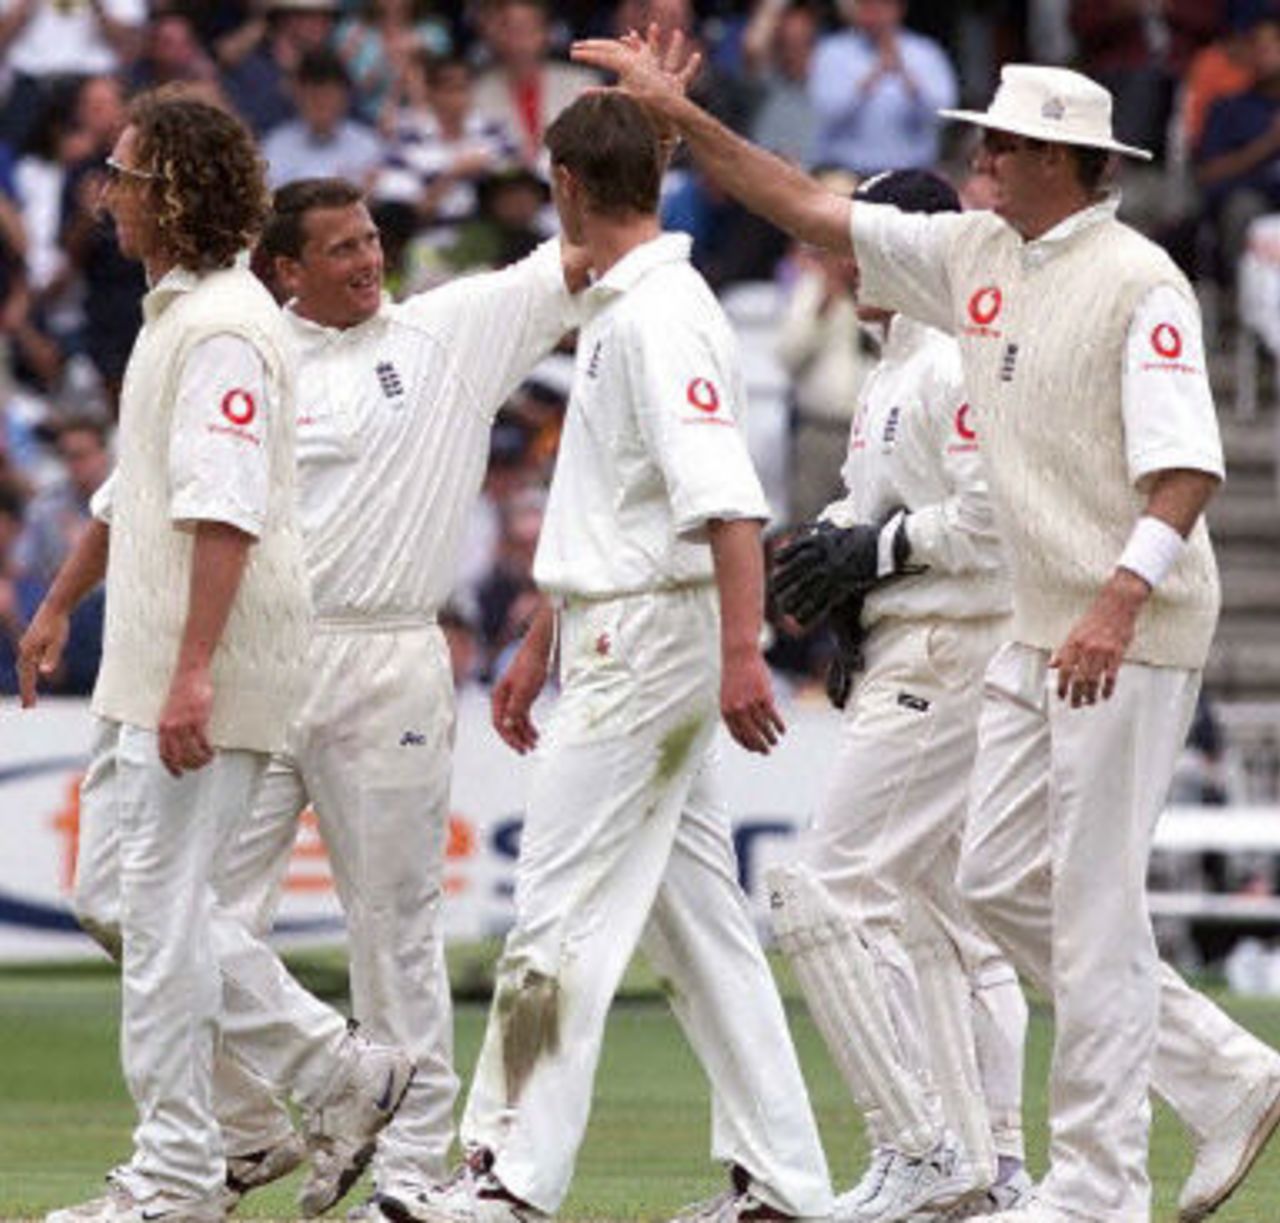 Darren Gough celebrates his 200th wicket, day 4, 1st Test at Lord's, 17-21 May 2001.